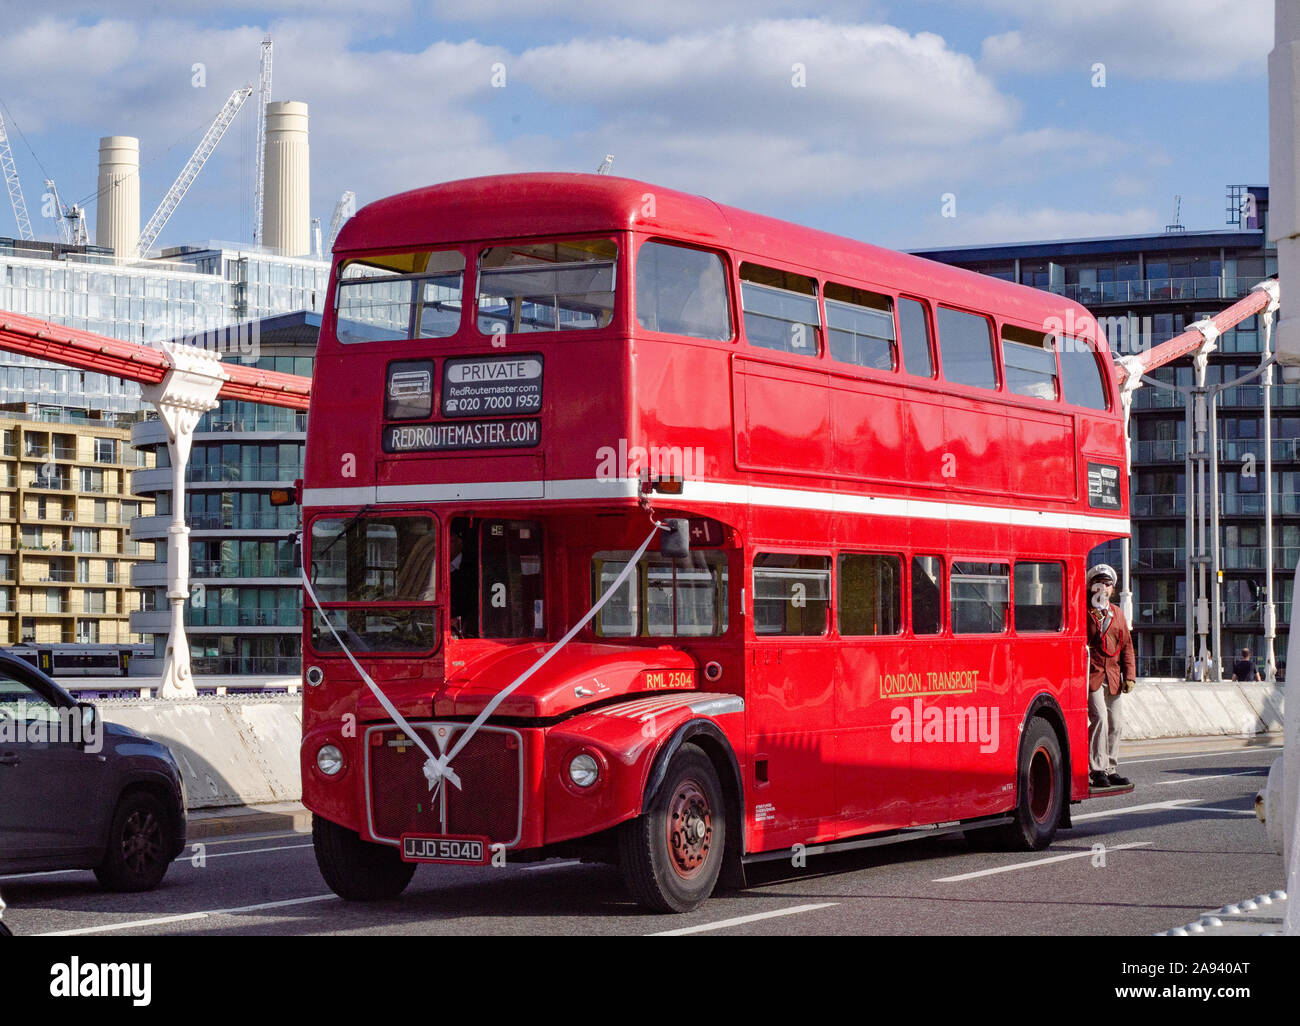 A vintage iconic red double decker bus in chelsea bridge london advertised for events use Stock Photo